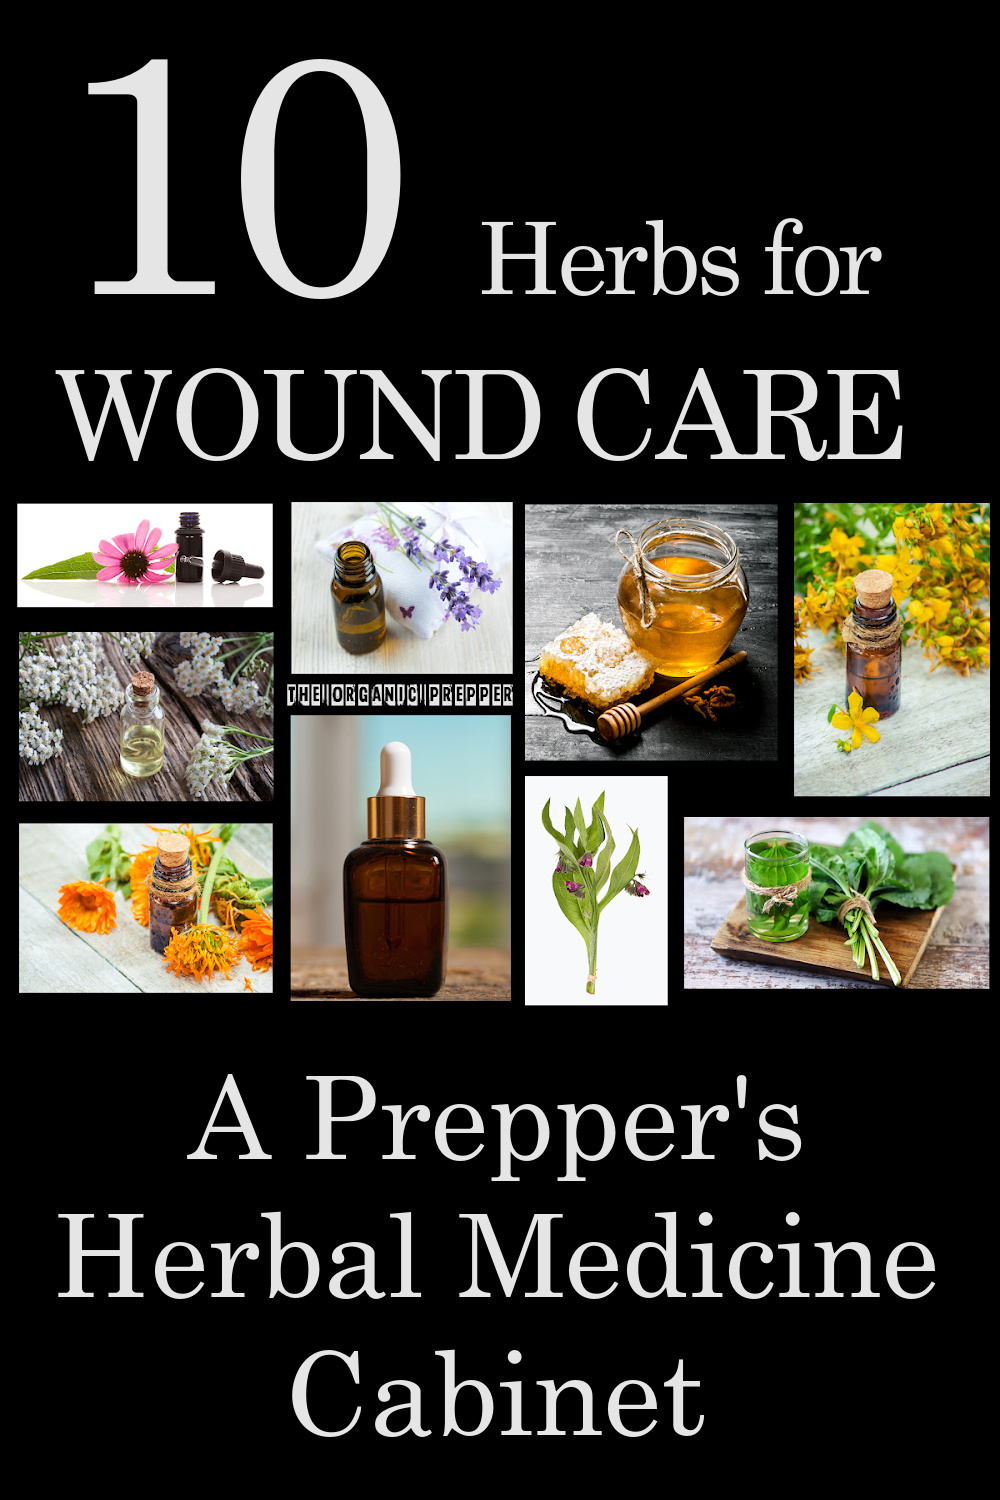 10 Herbs for Wound Care: A Prepper's Herbal Medicine Cabinet